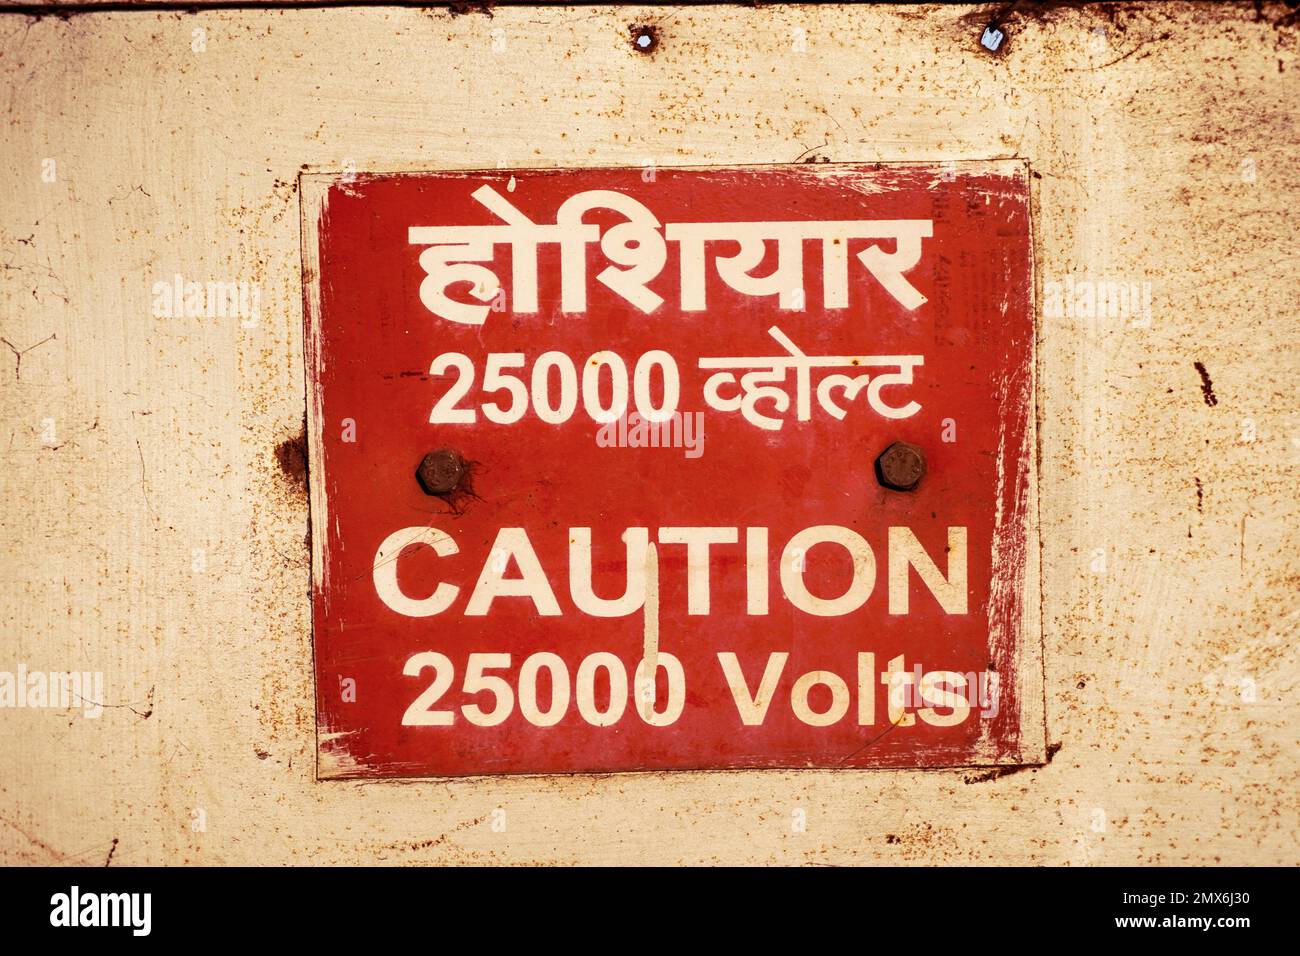 Caution 25000 high voltage safety warning sign board in red color and the instructions to communicate at work to say keep away from this place Stock Photo